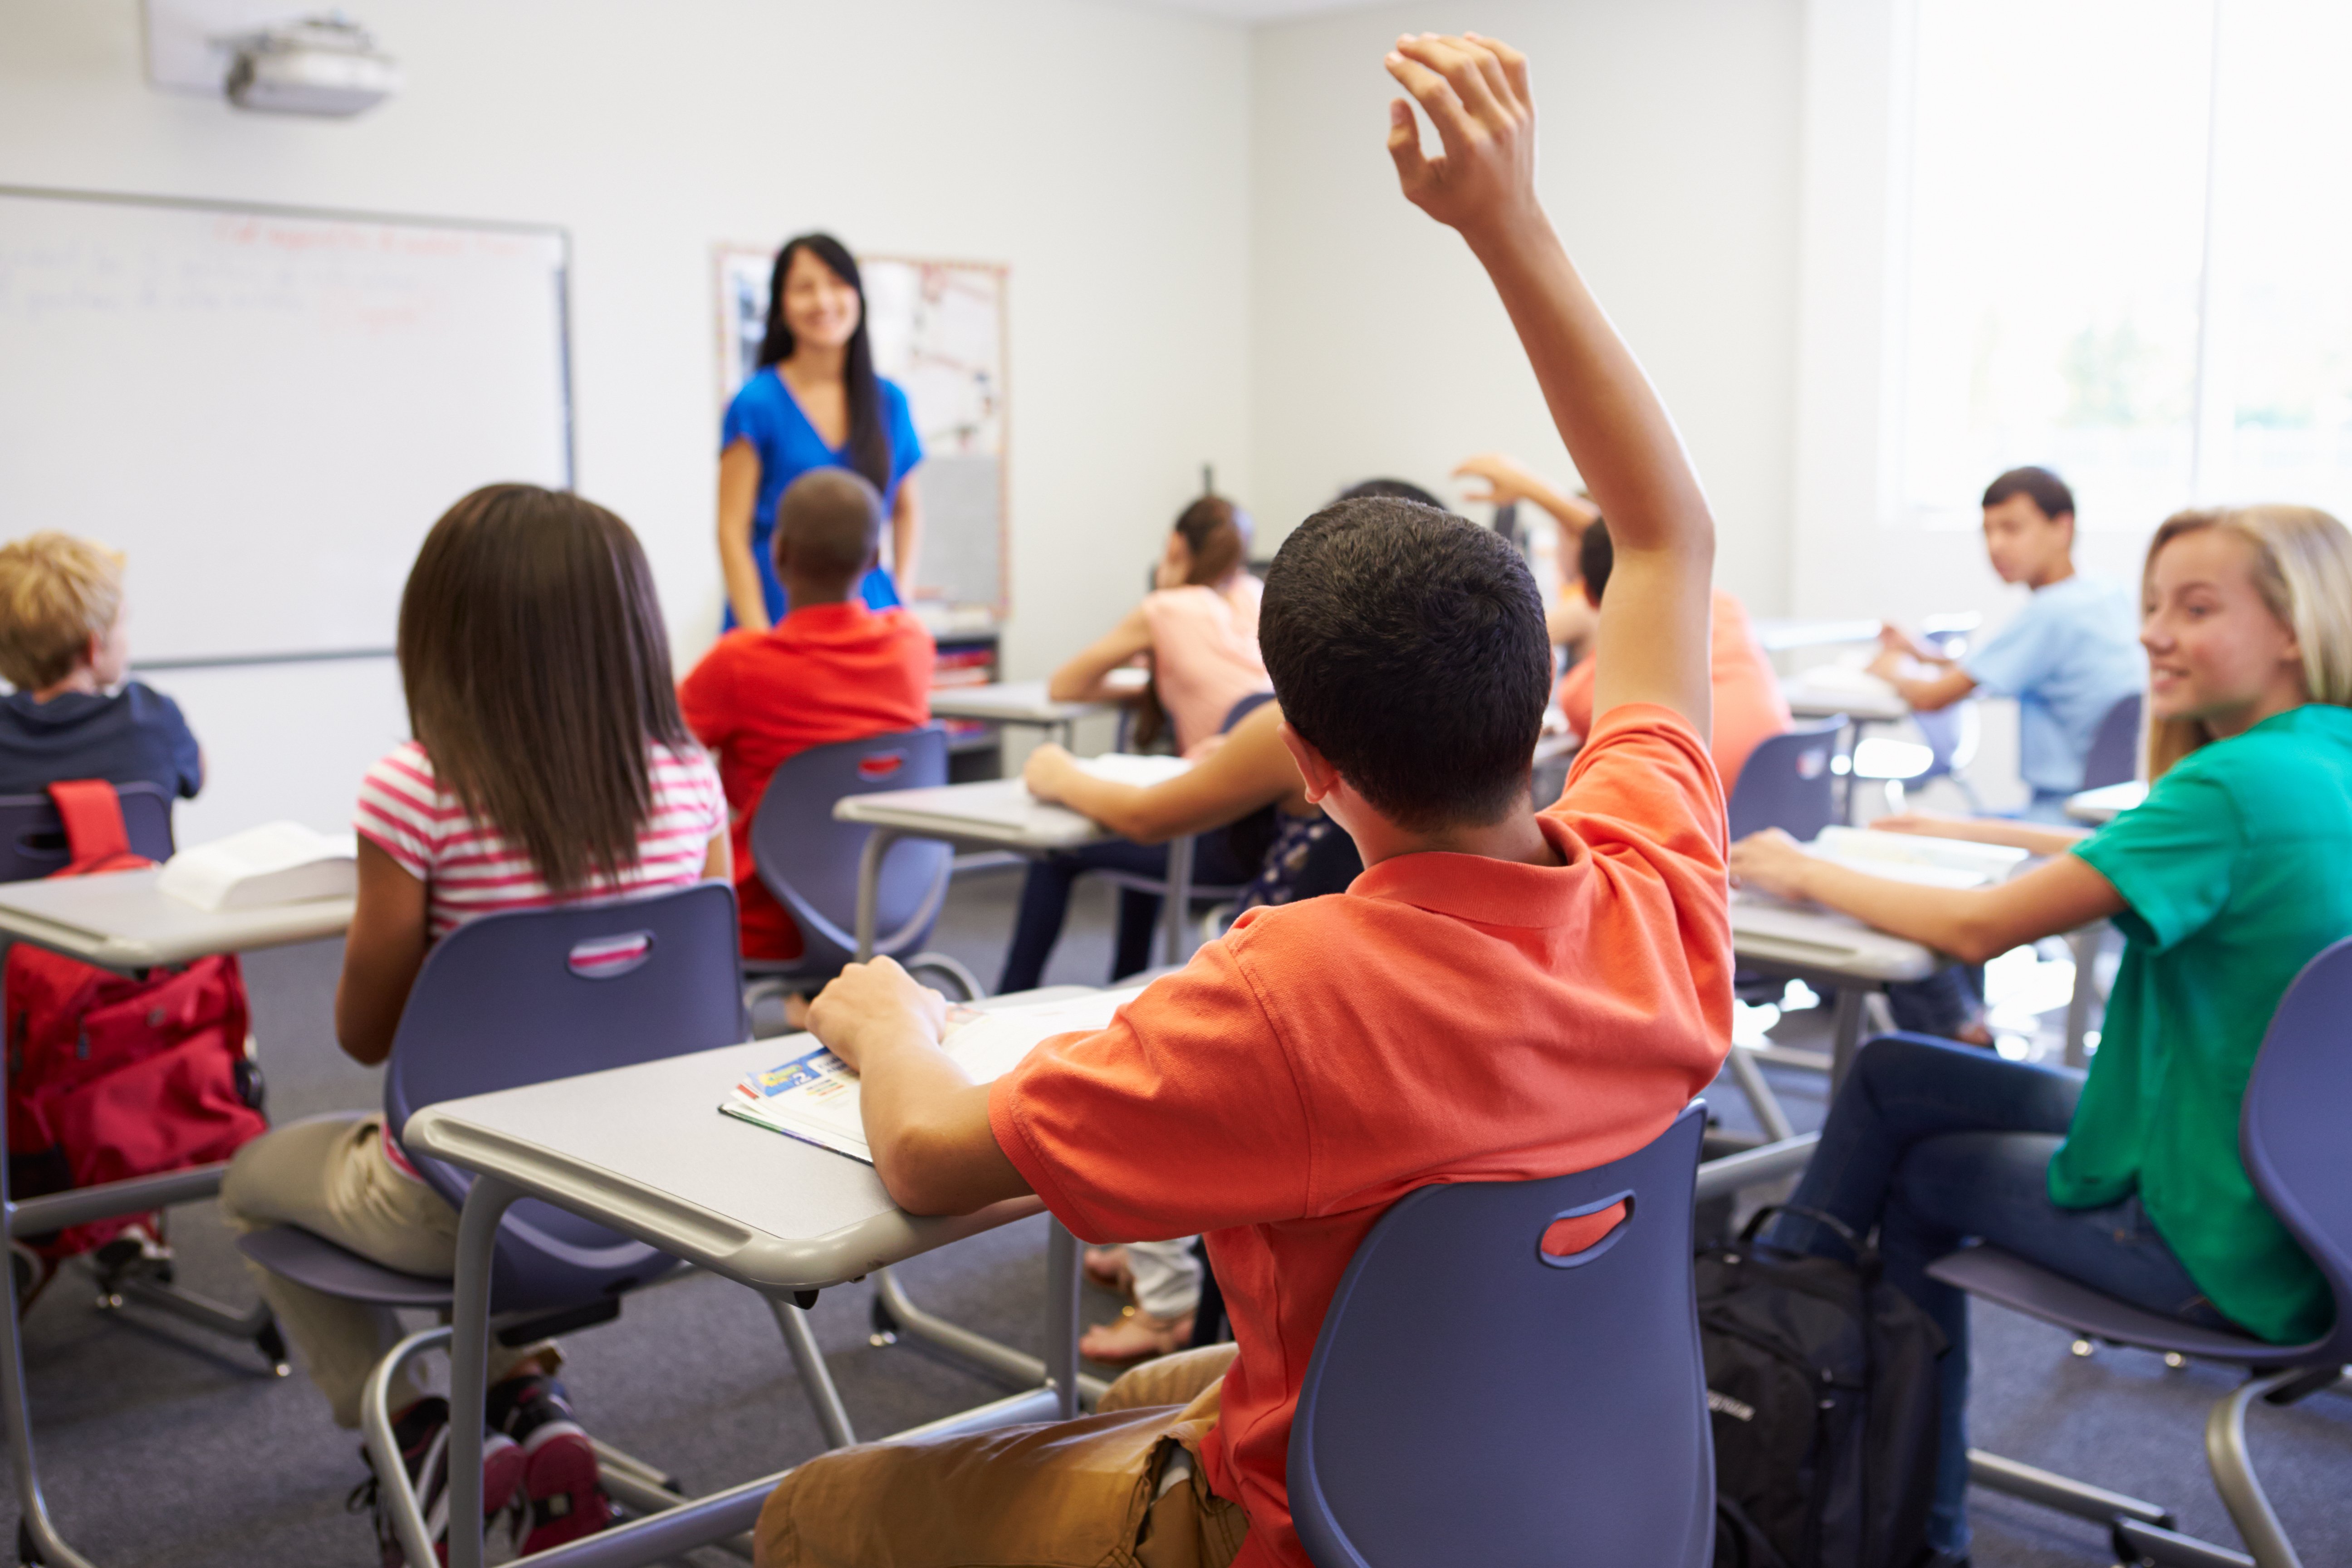 Male student raising his hand in class.|Source: Shutterstock